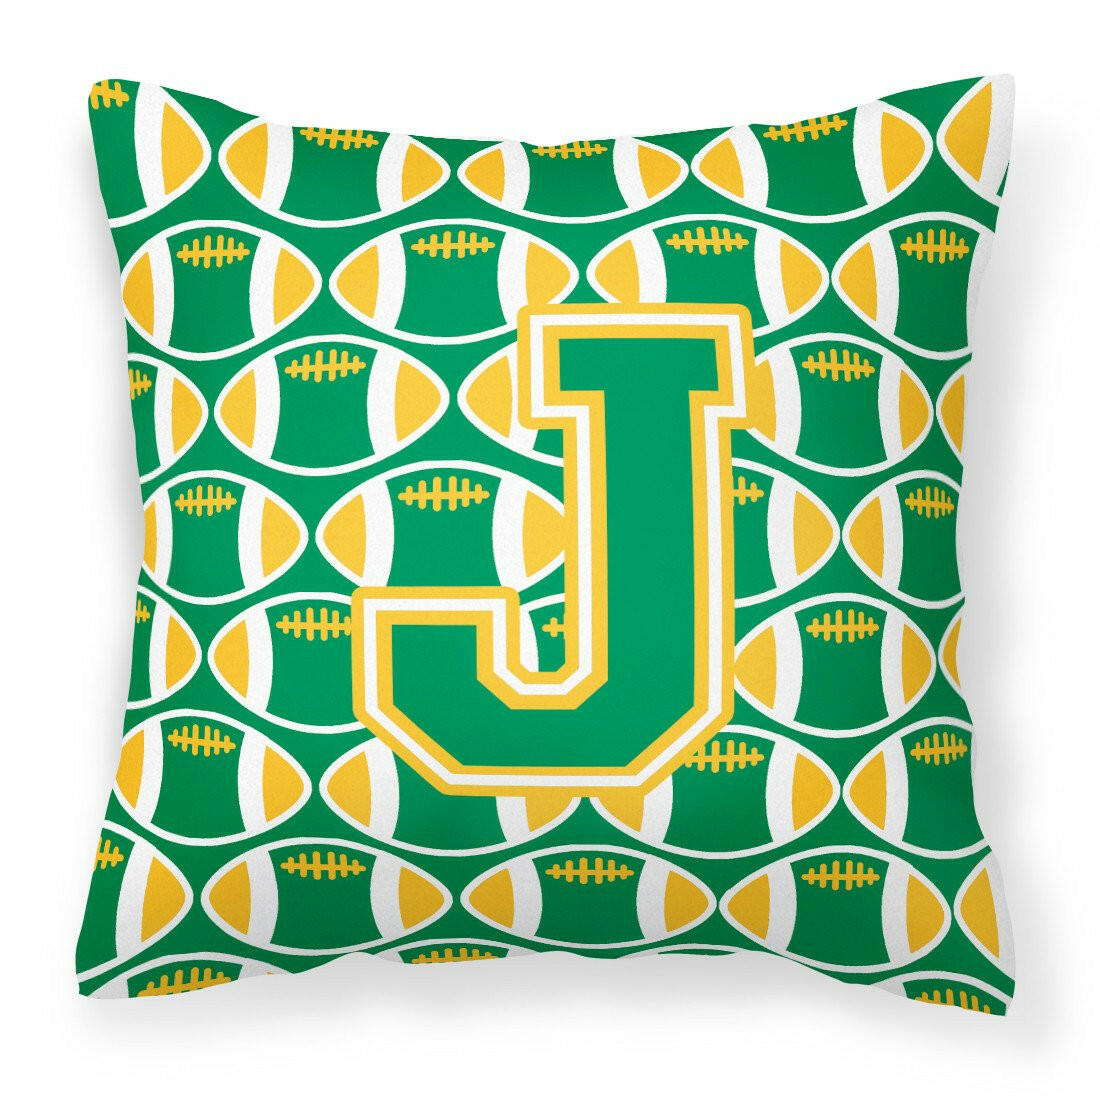 Letter J Football Green and Gold Fabric Decorative Pillow CJ1069-JPW1414 by Caroline's Treasures